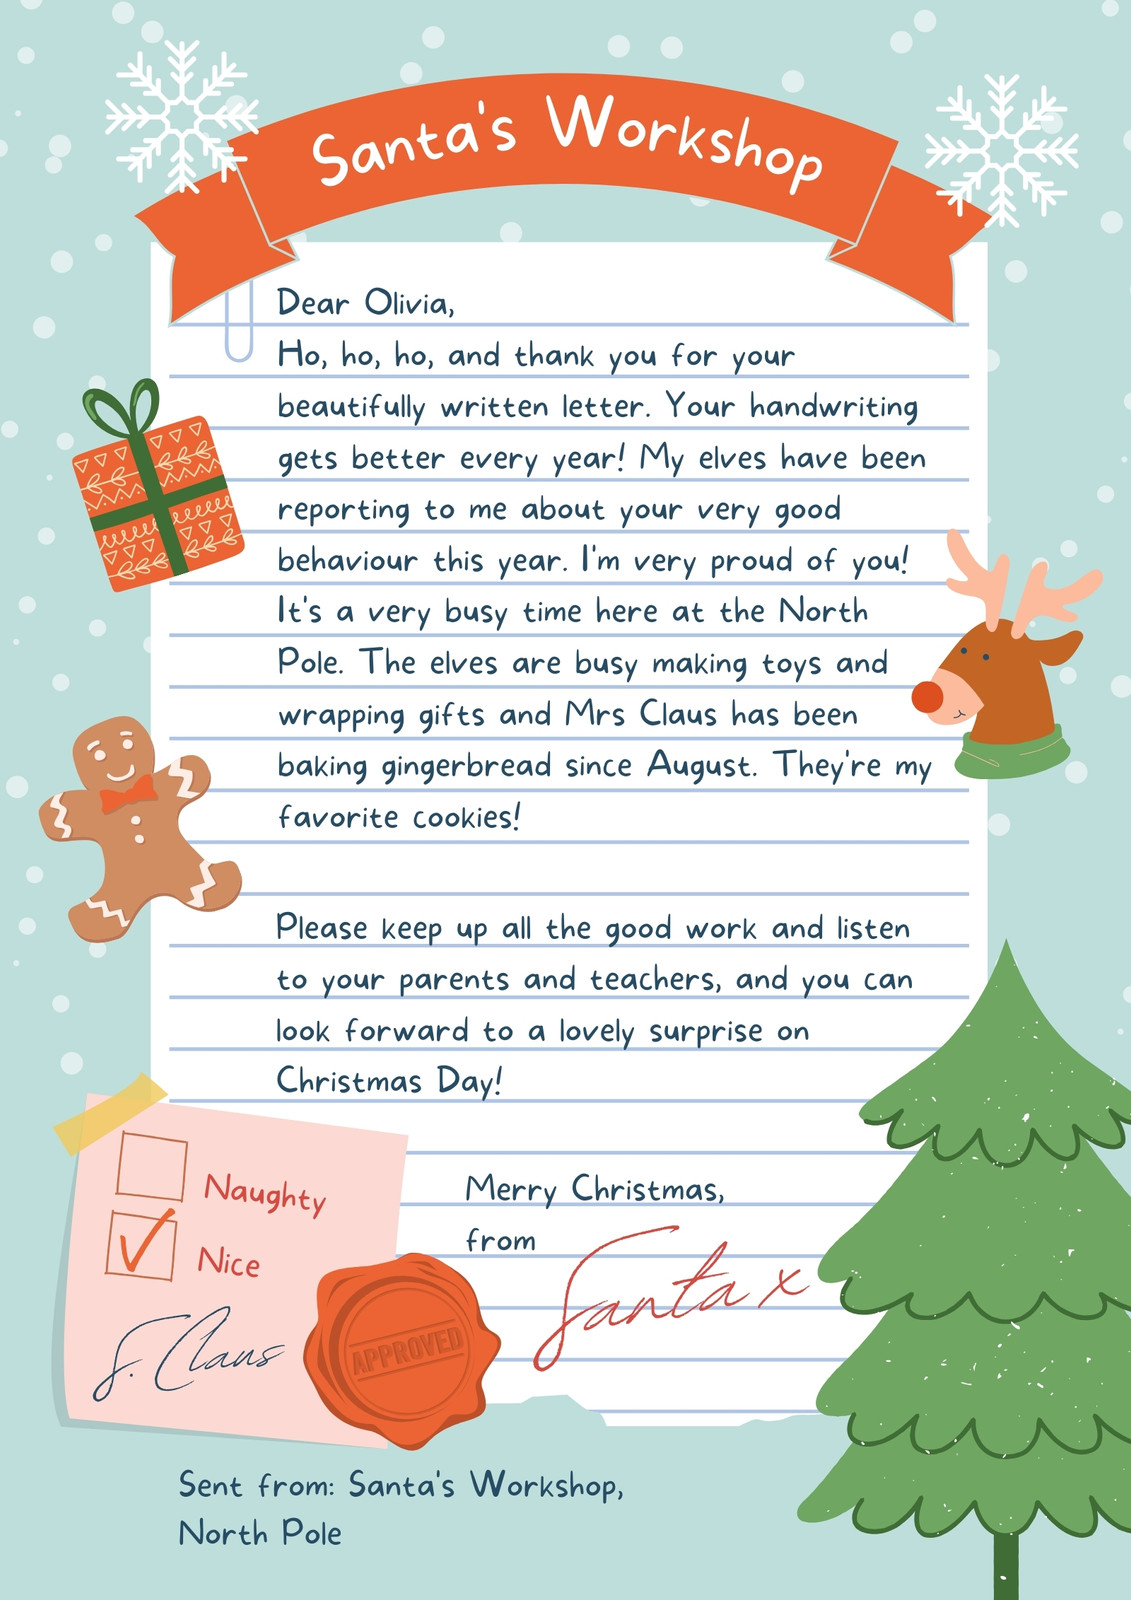 Letters to Santa are answered after they're left in a 'magical